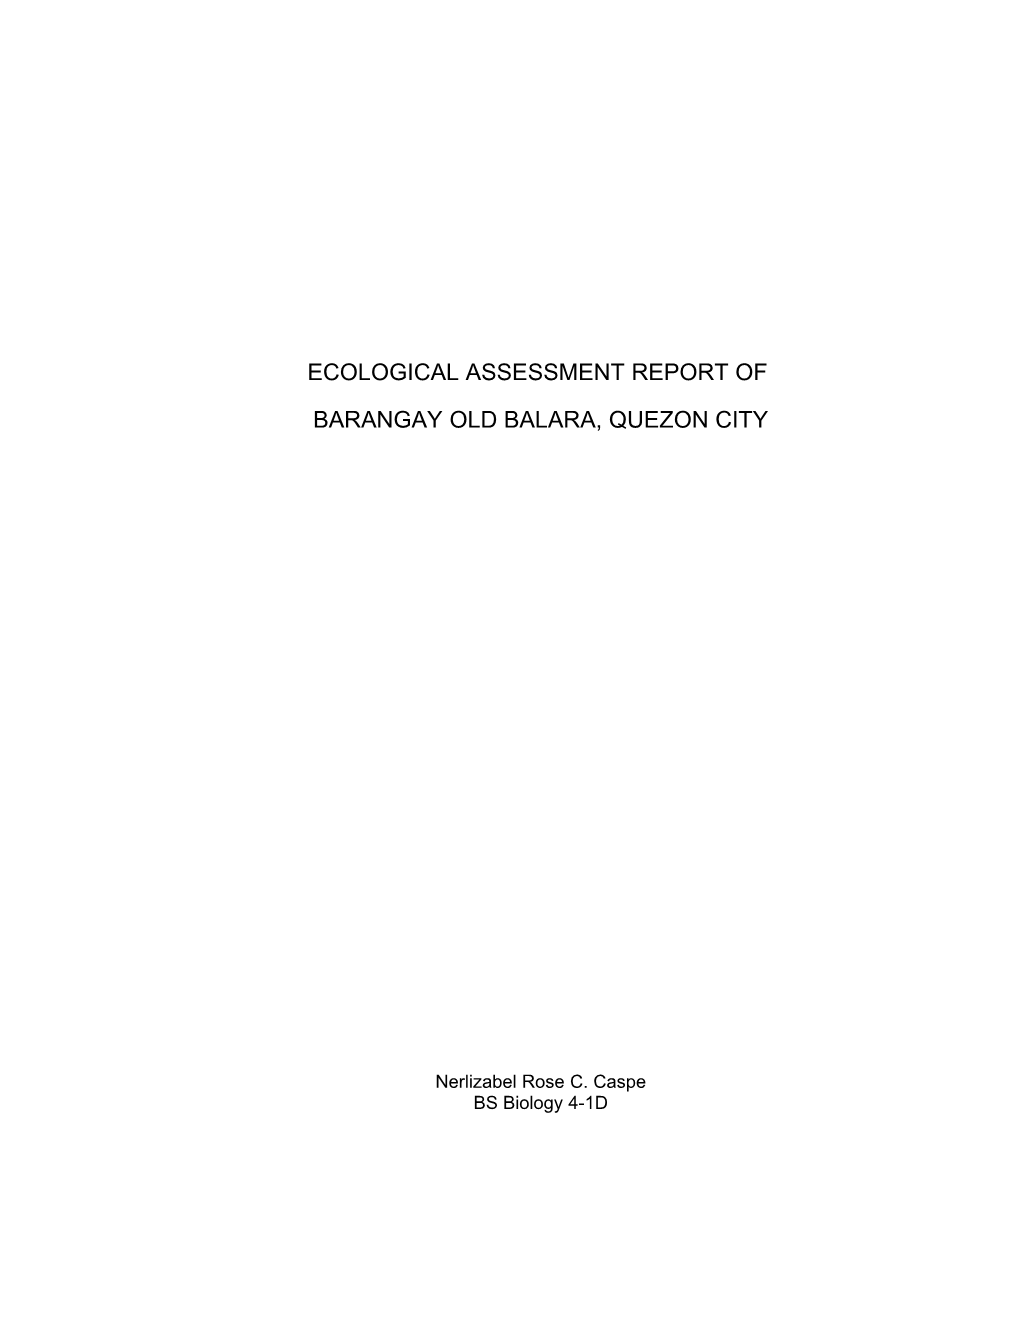 Ecological Assessment Report of Barangay Old